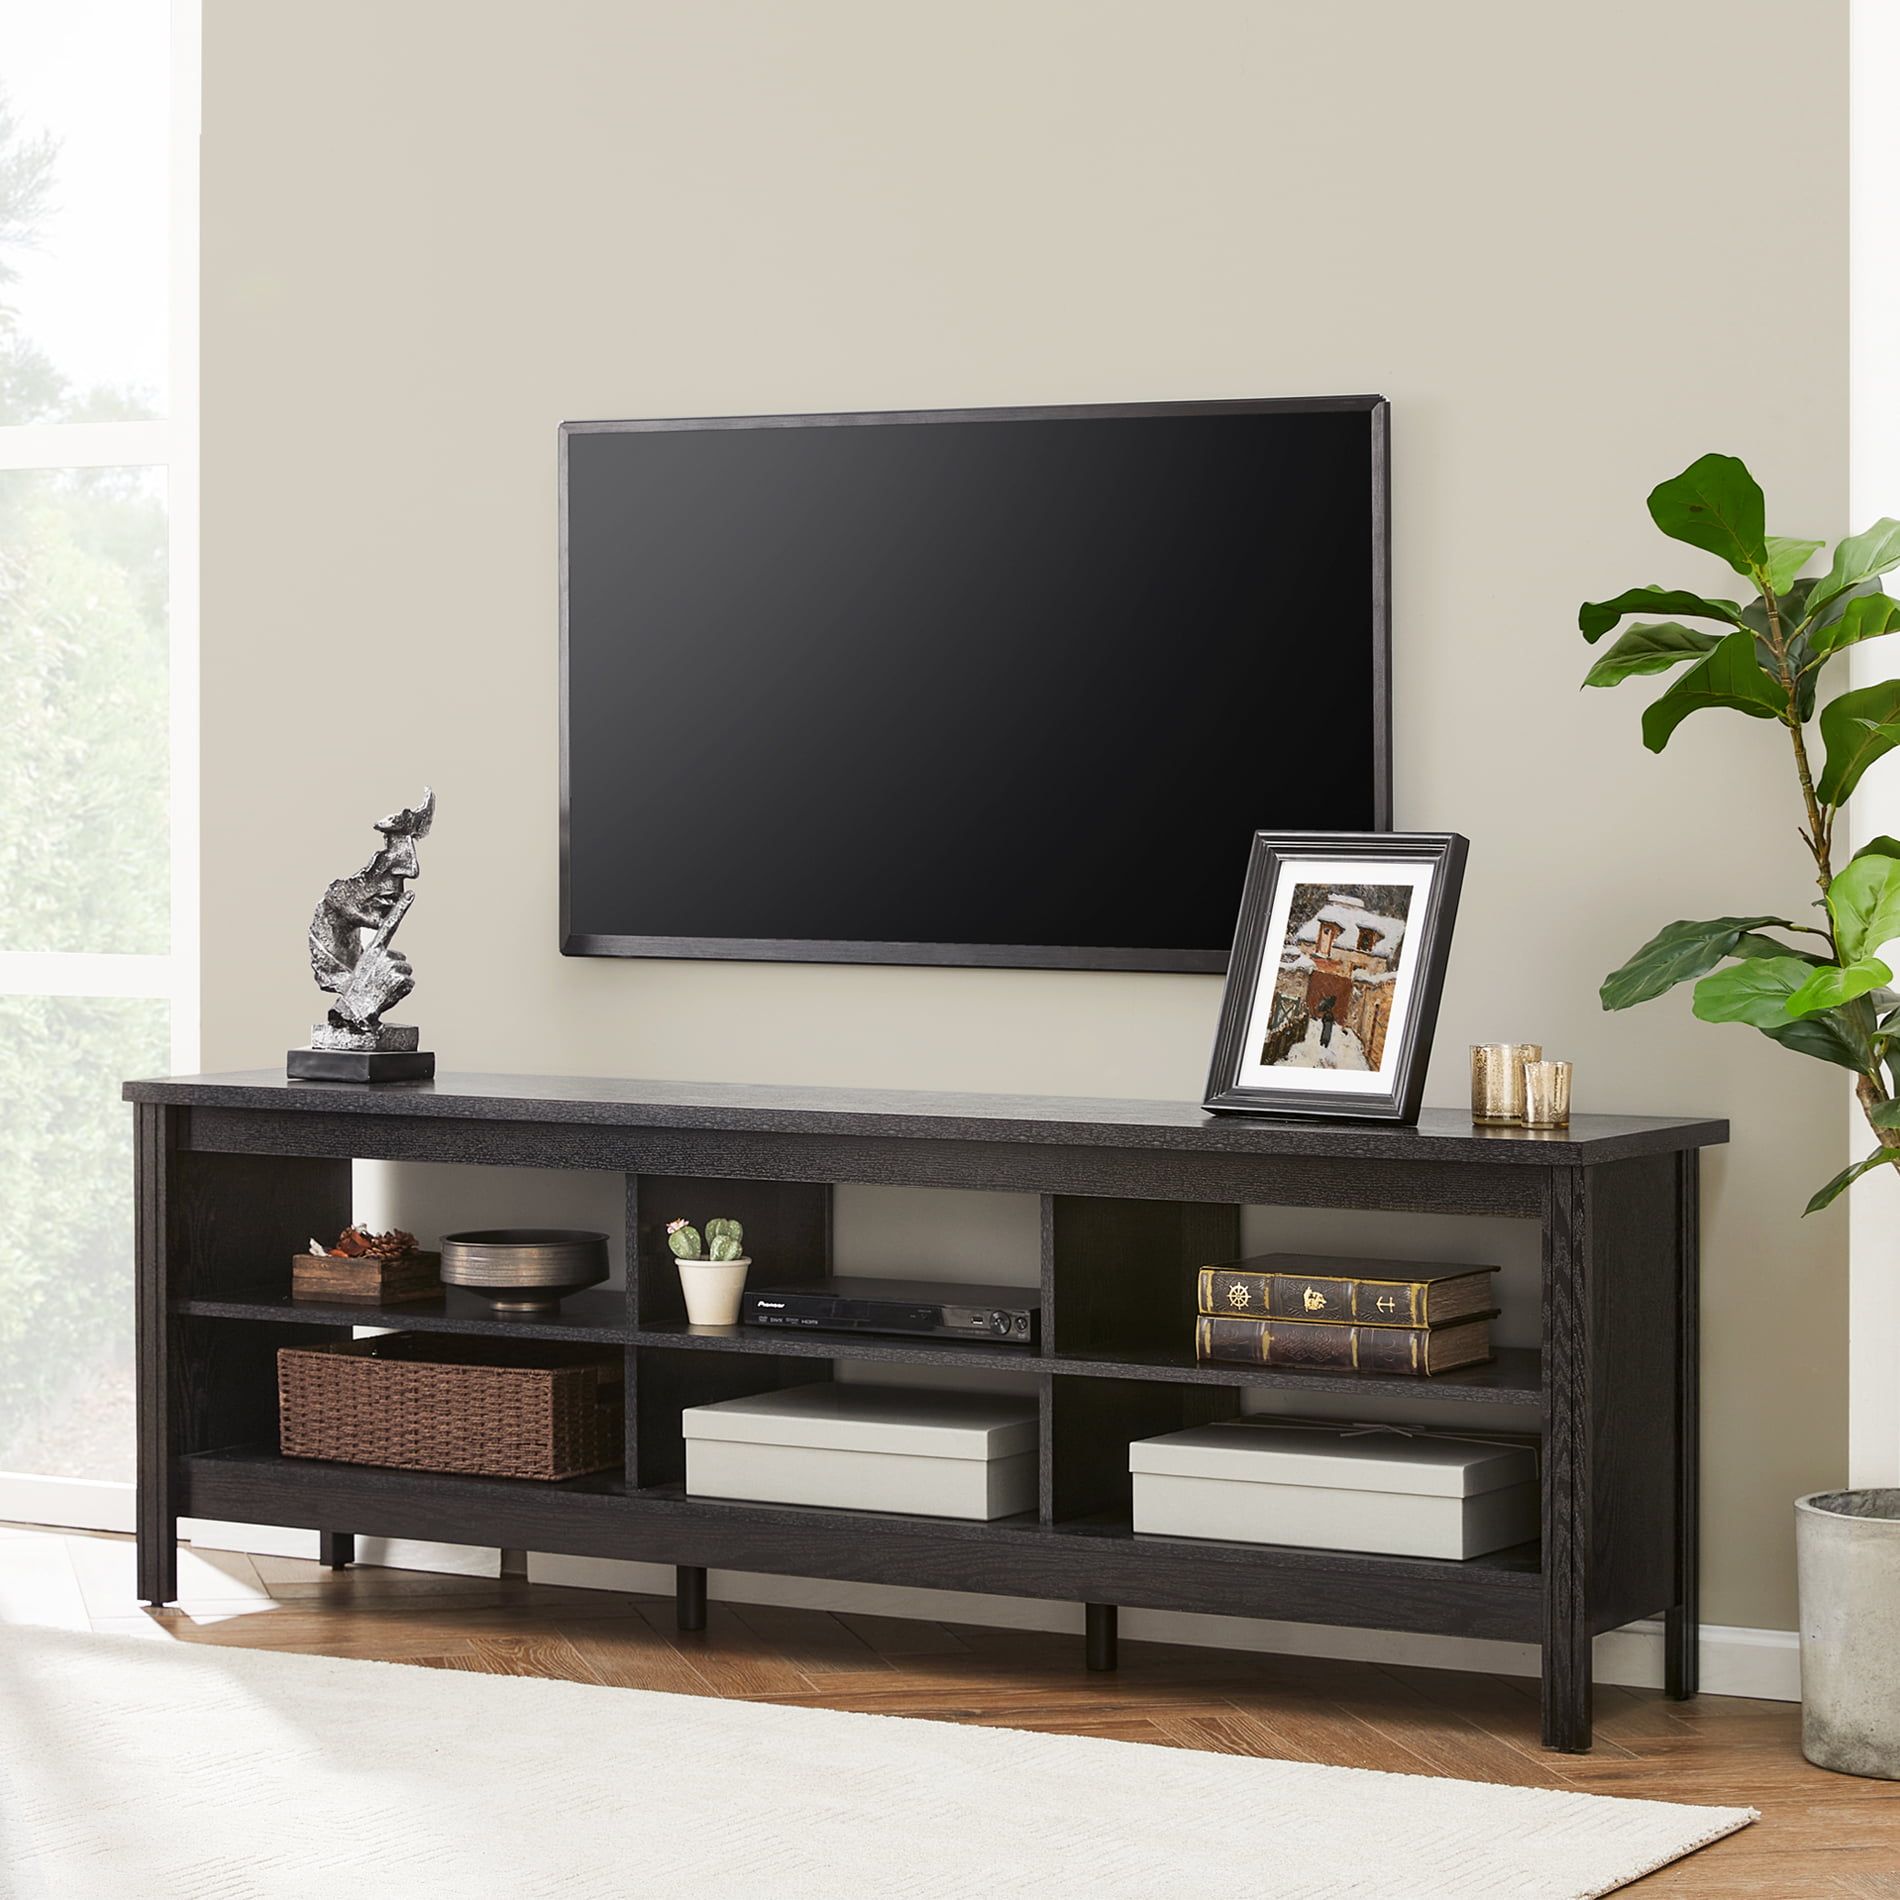 Farmhouse Tv Stands For 75 Inch Flat Screen Media Console Storage Regarding Dual Use Storage Cabinet Tv Stands (View 13 of 20)